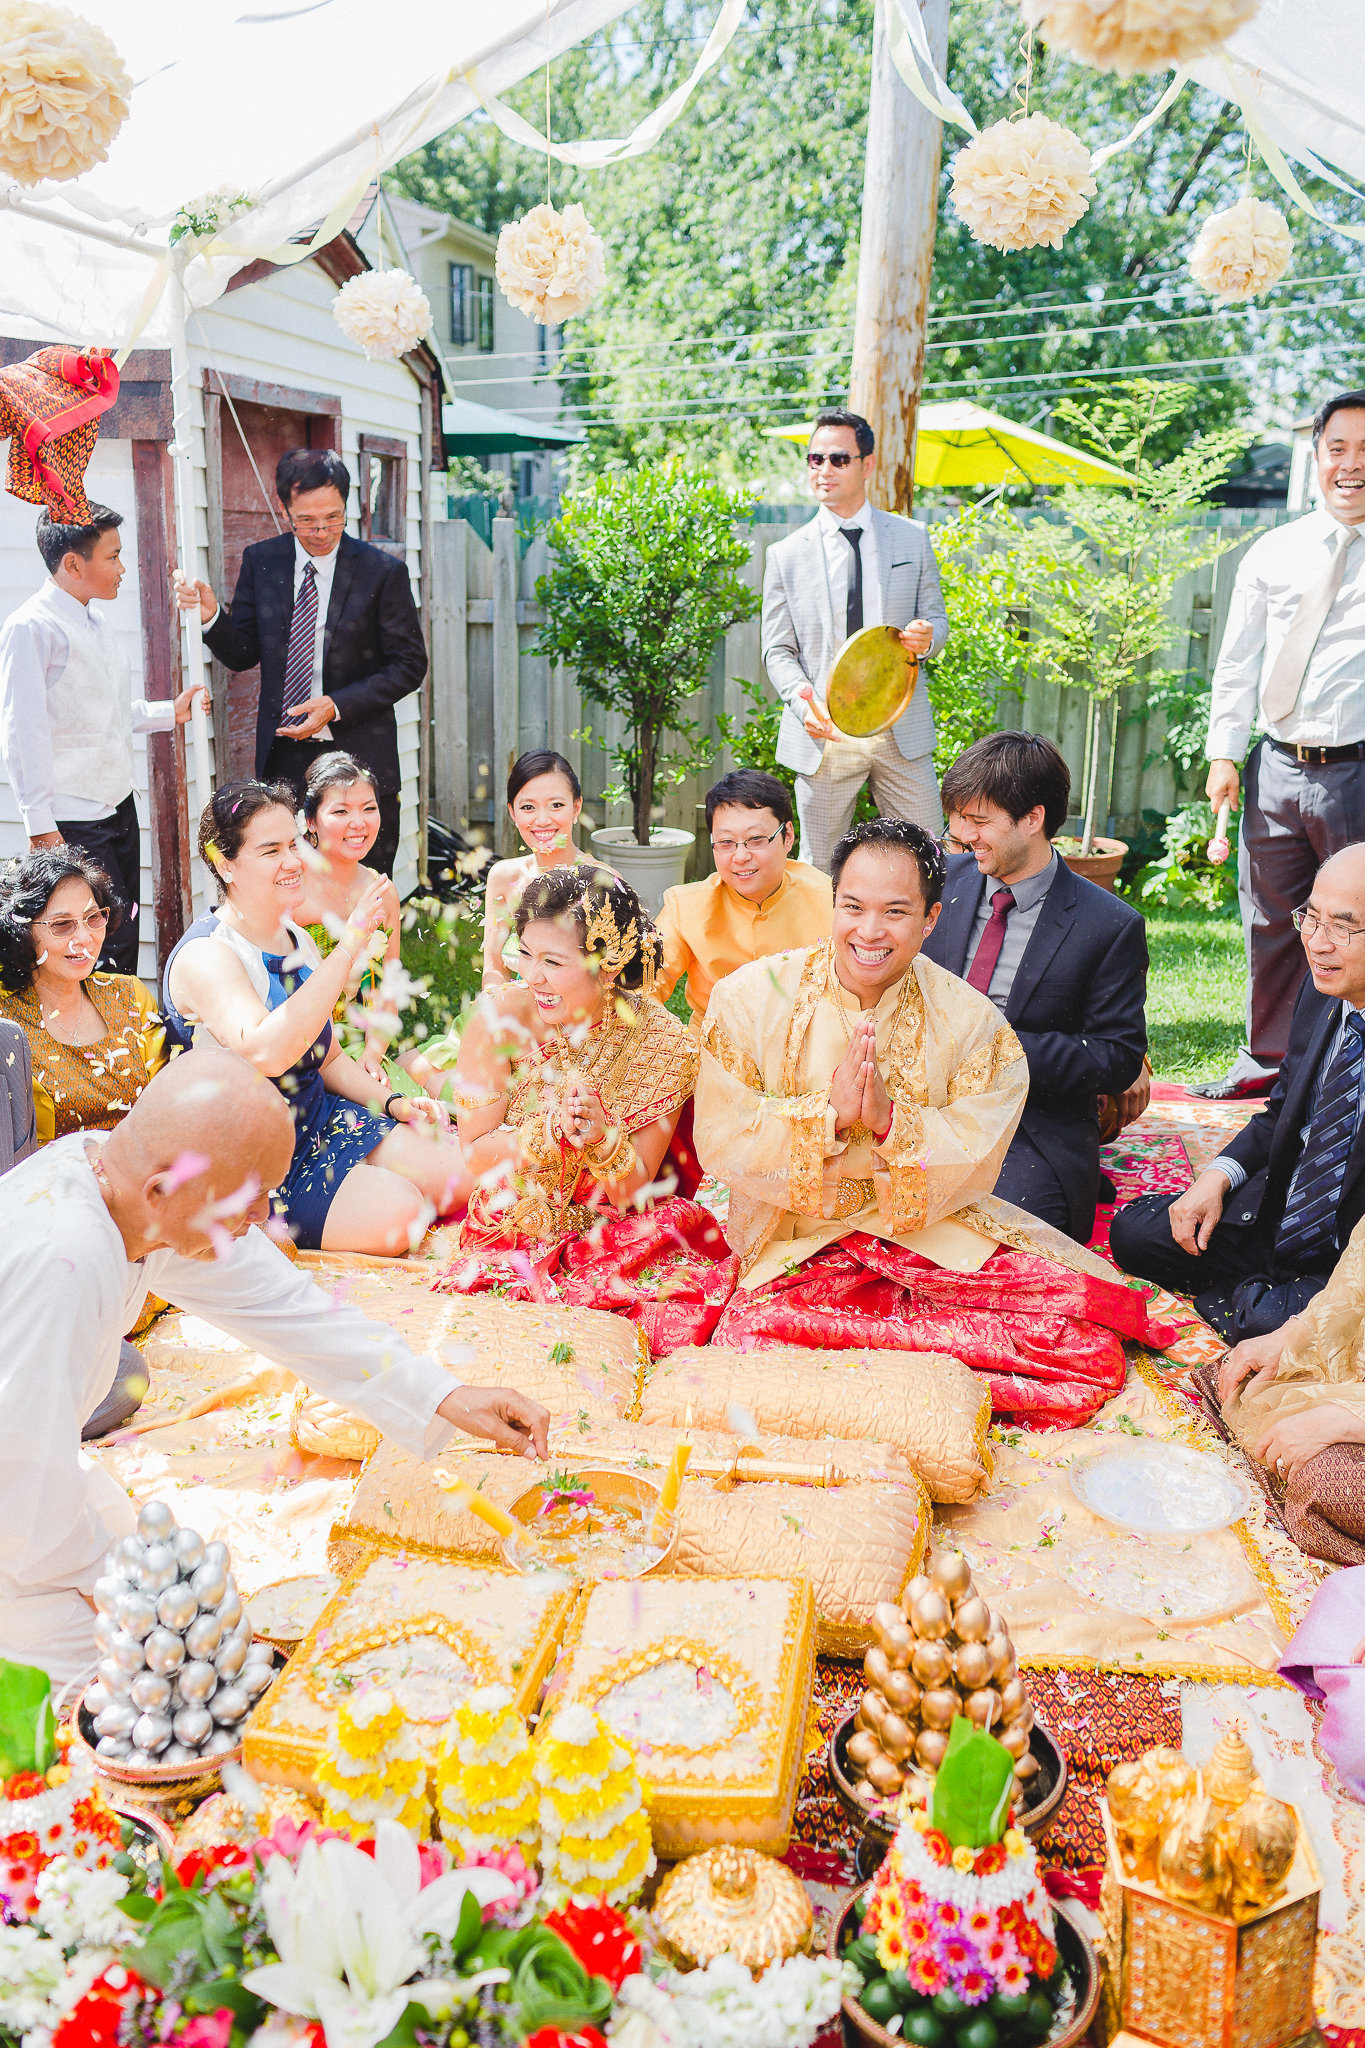 photographe-montreal-mariage-culturel-traditionnel-cambodgien-lisa-renault-photographie-traditional-cultural-cambodian-wedding-72